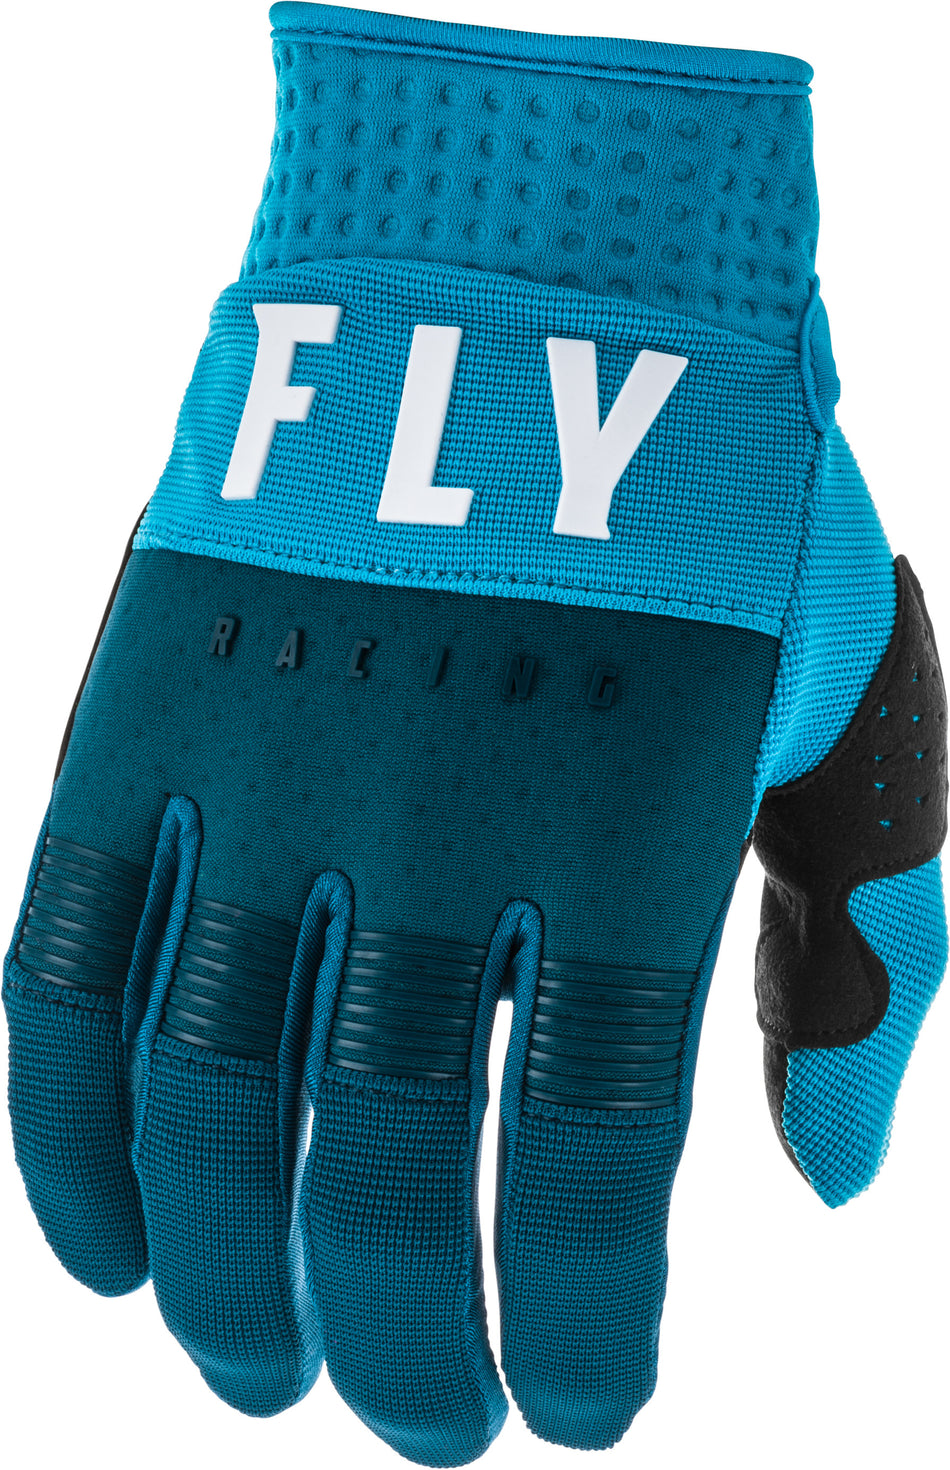 FLY RACING F-16 Gloves Navy/Blue/White Sz 02 373-91102